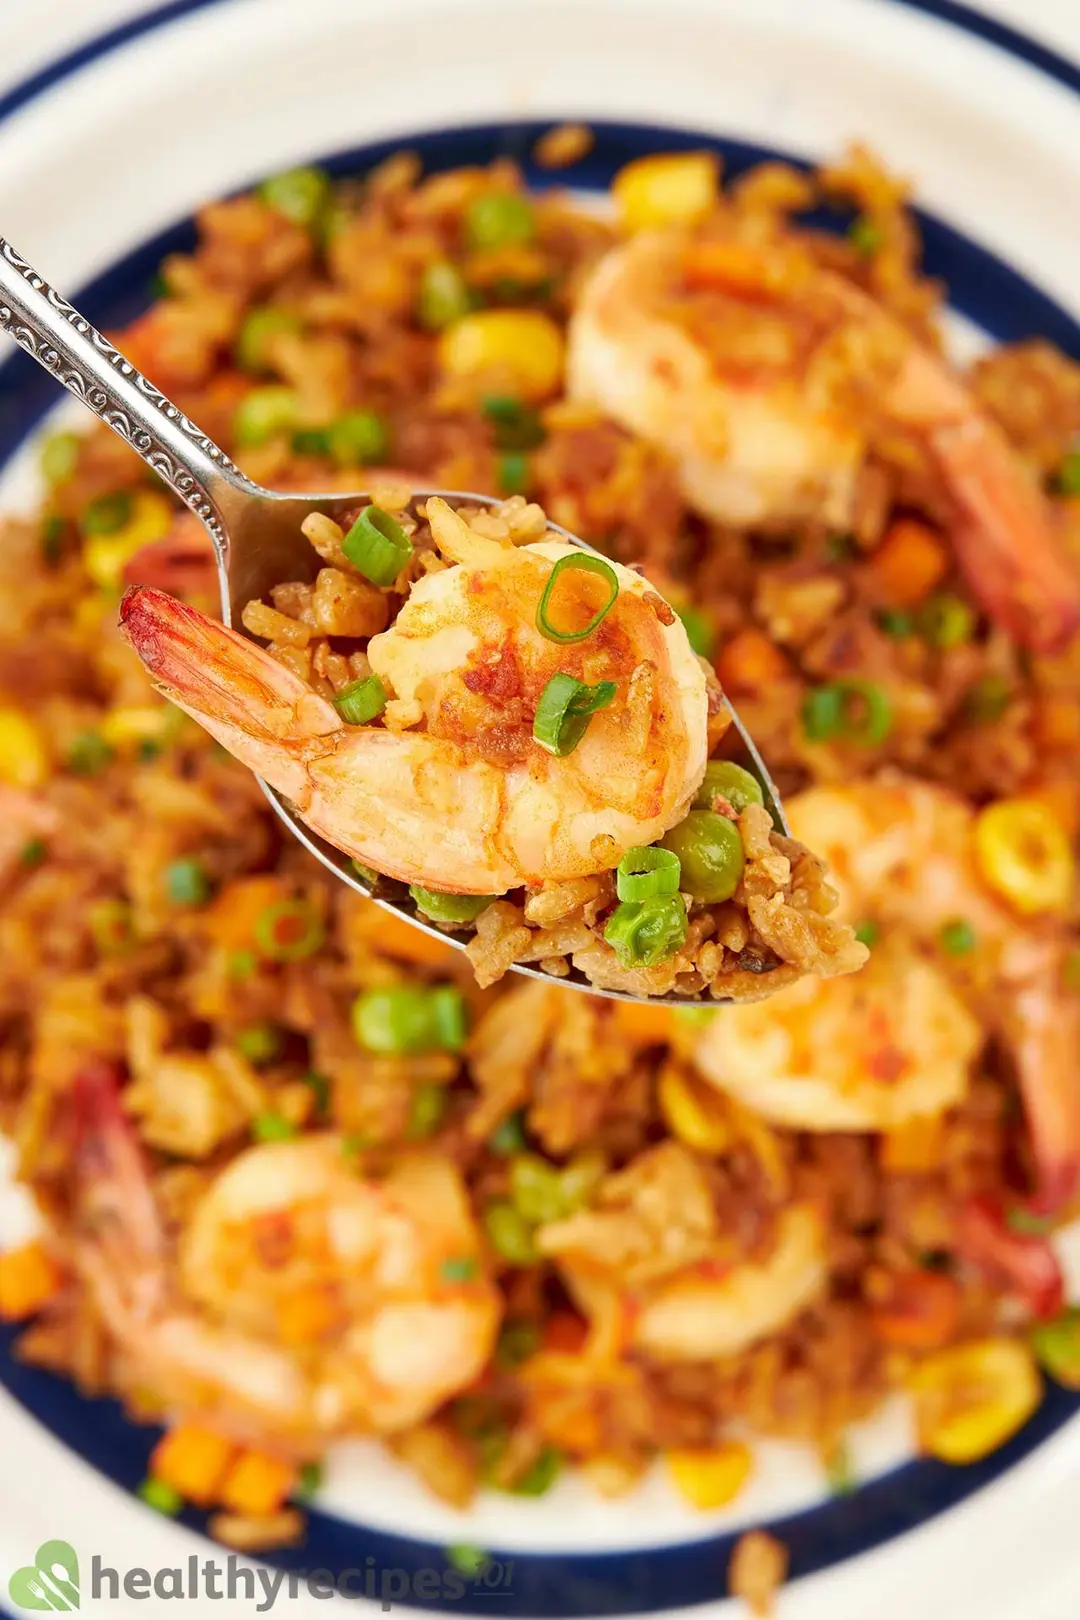 Is This Shrimp Fried Rice Recipe Healthy